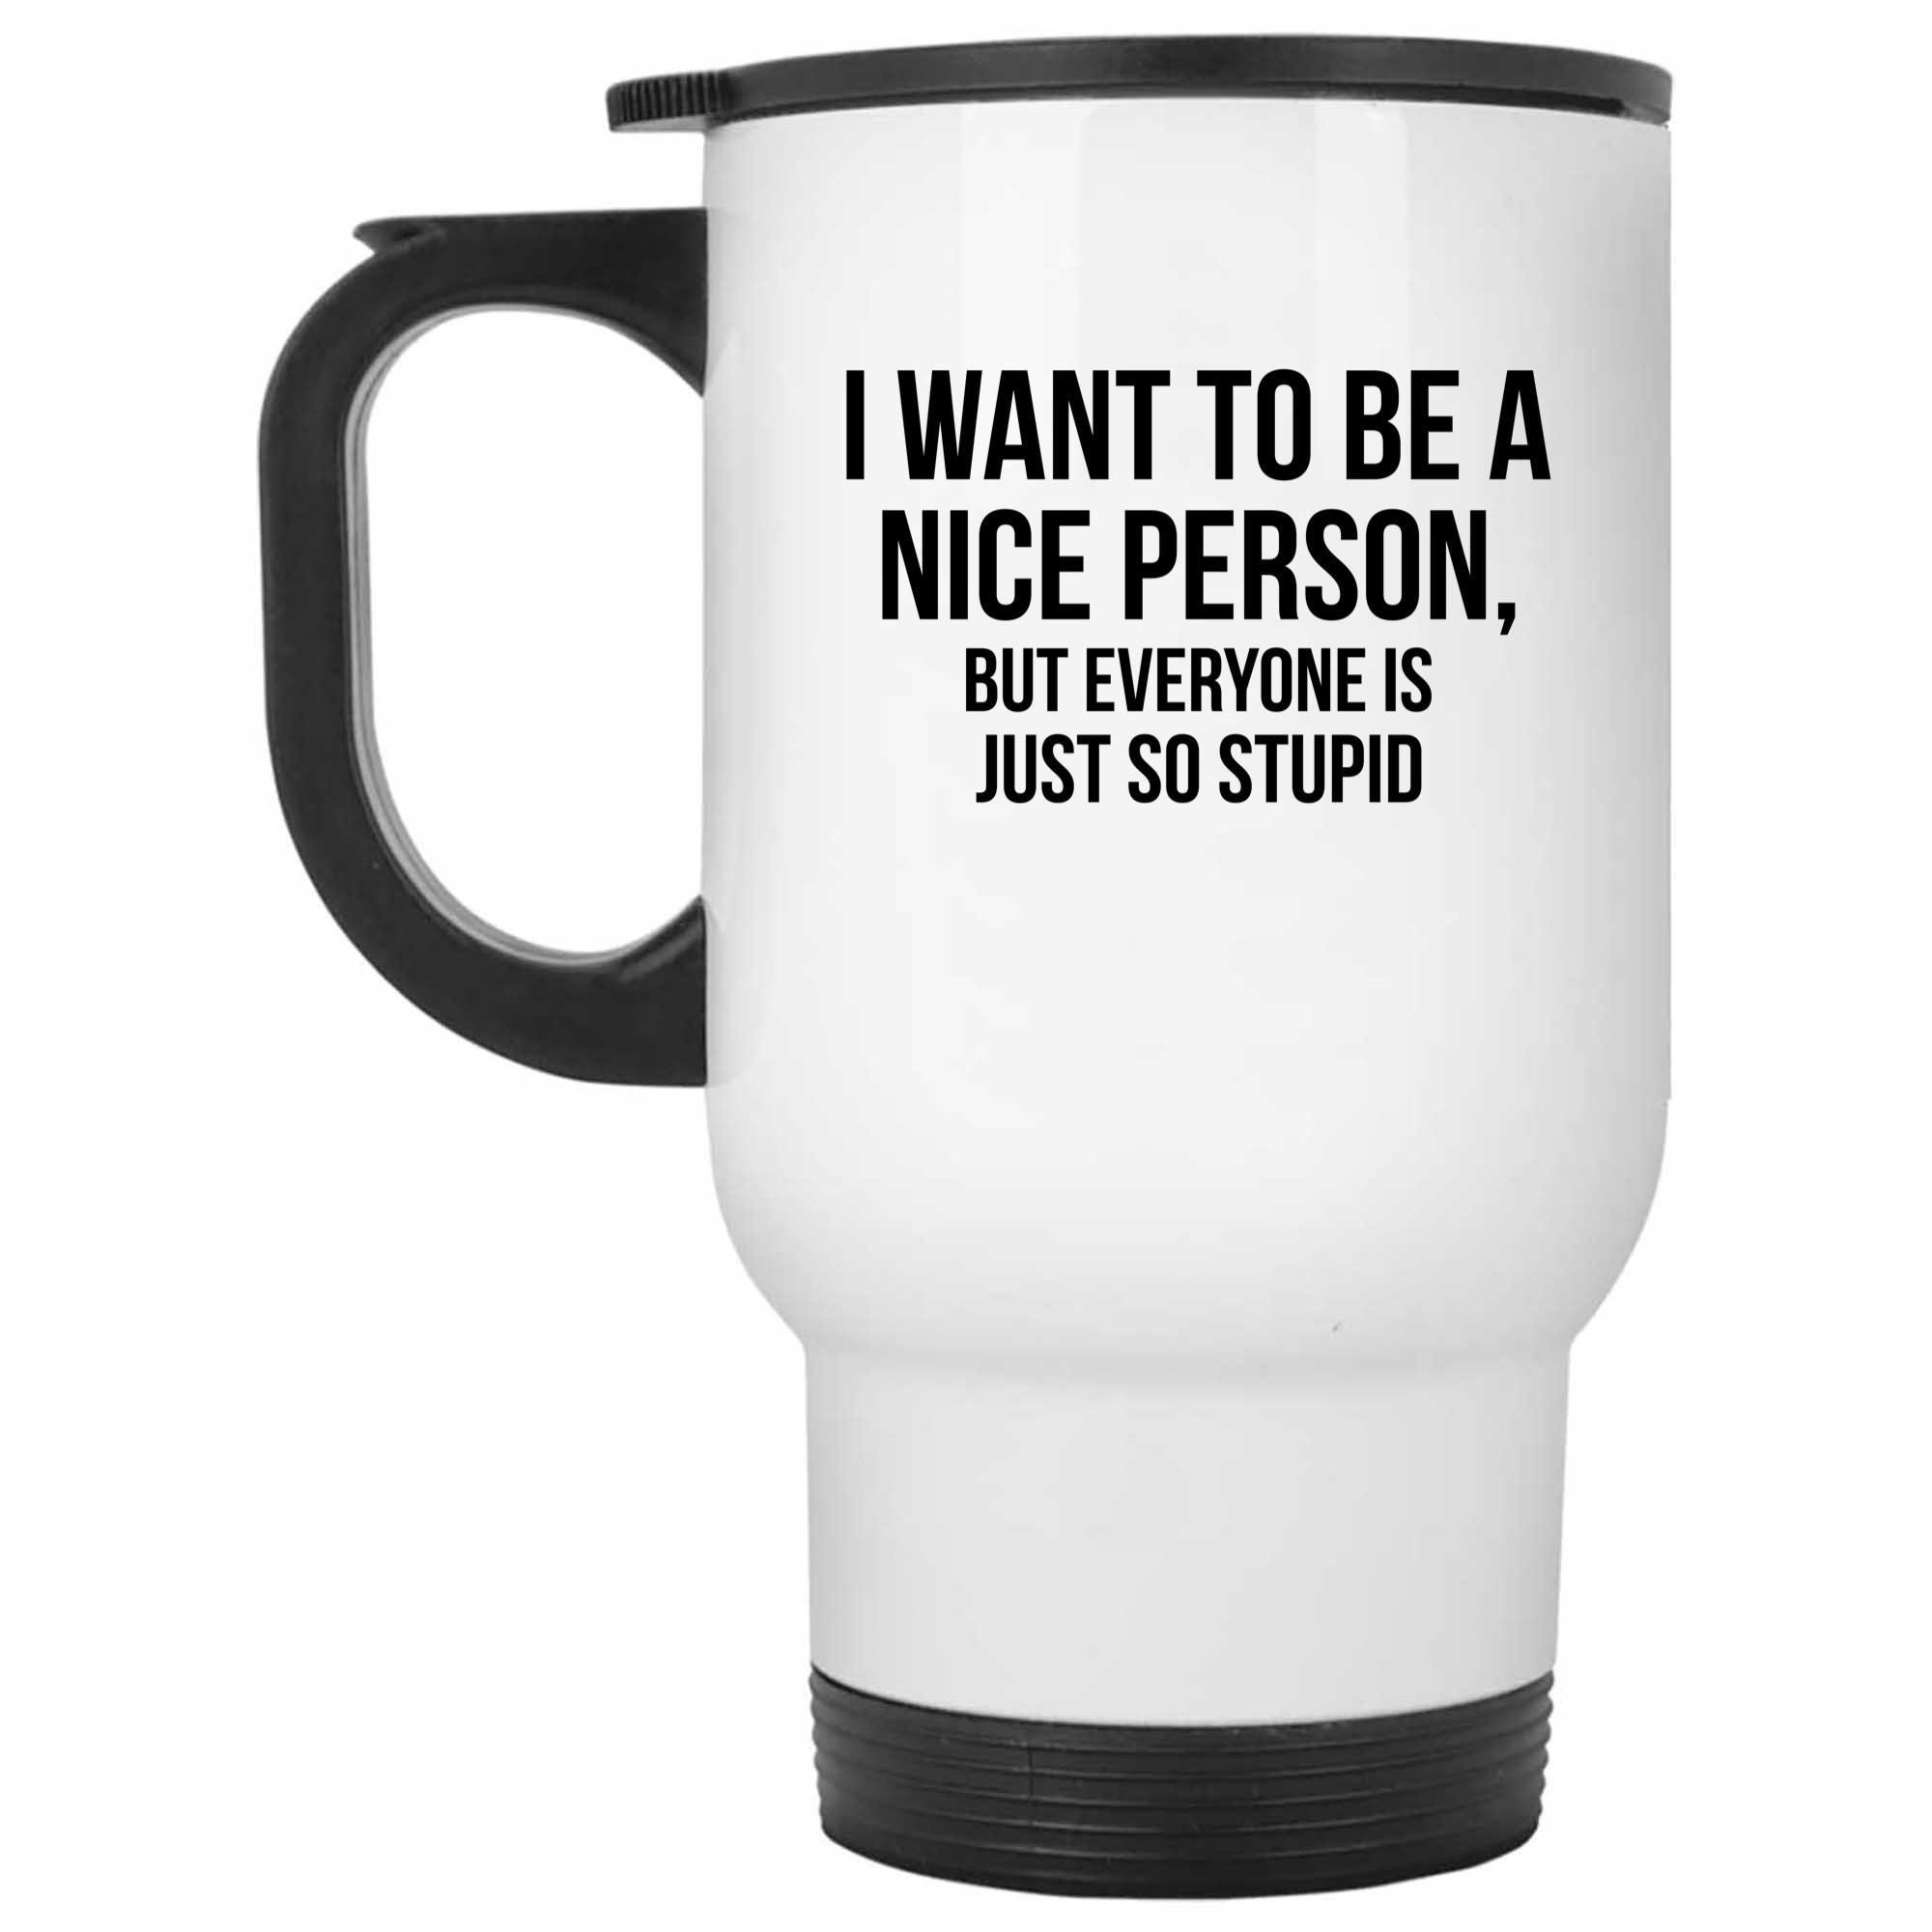 Skitongifts Funny Ceramic Novelty Coffee Mug I Want To Be A Nice Person, But Everyone Is Just So Stupid xd4fztf